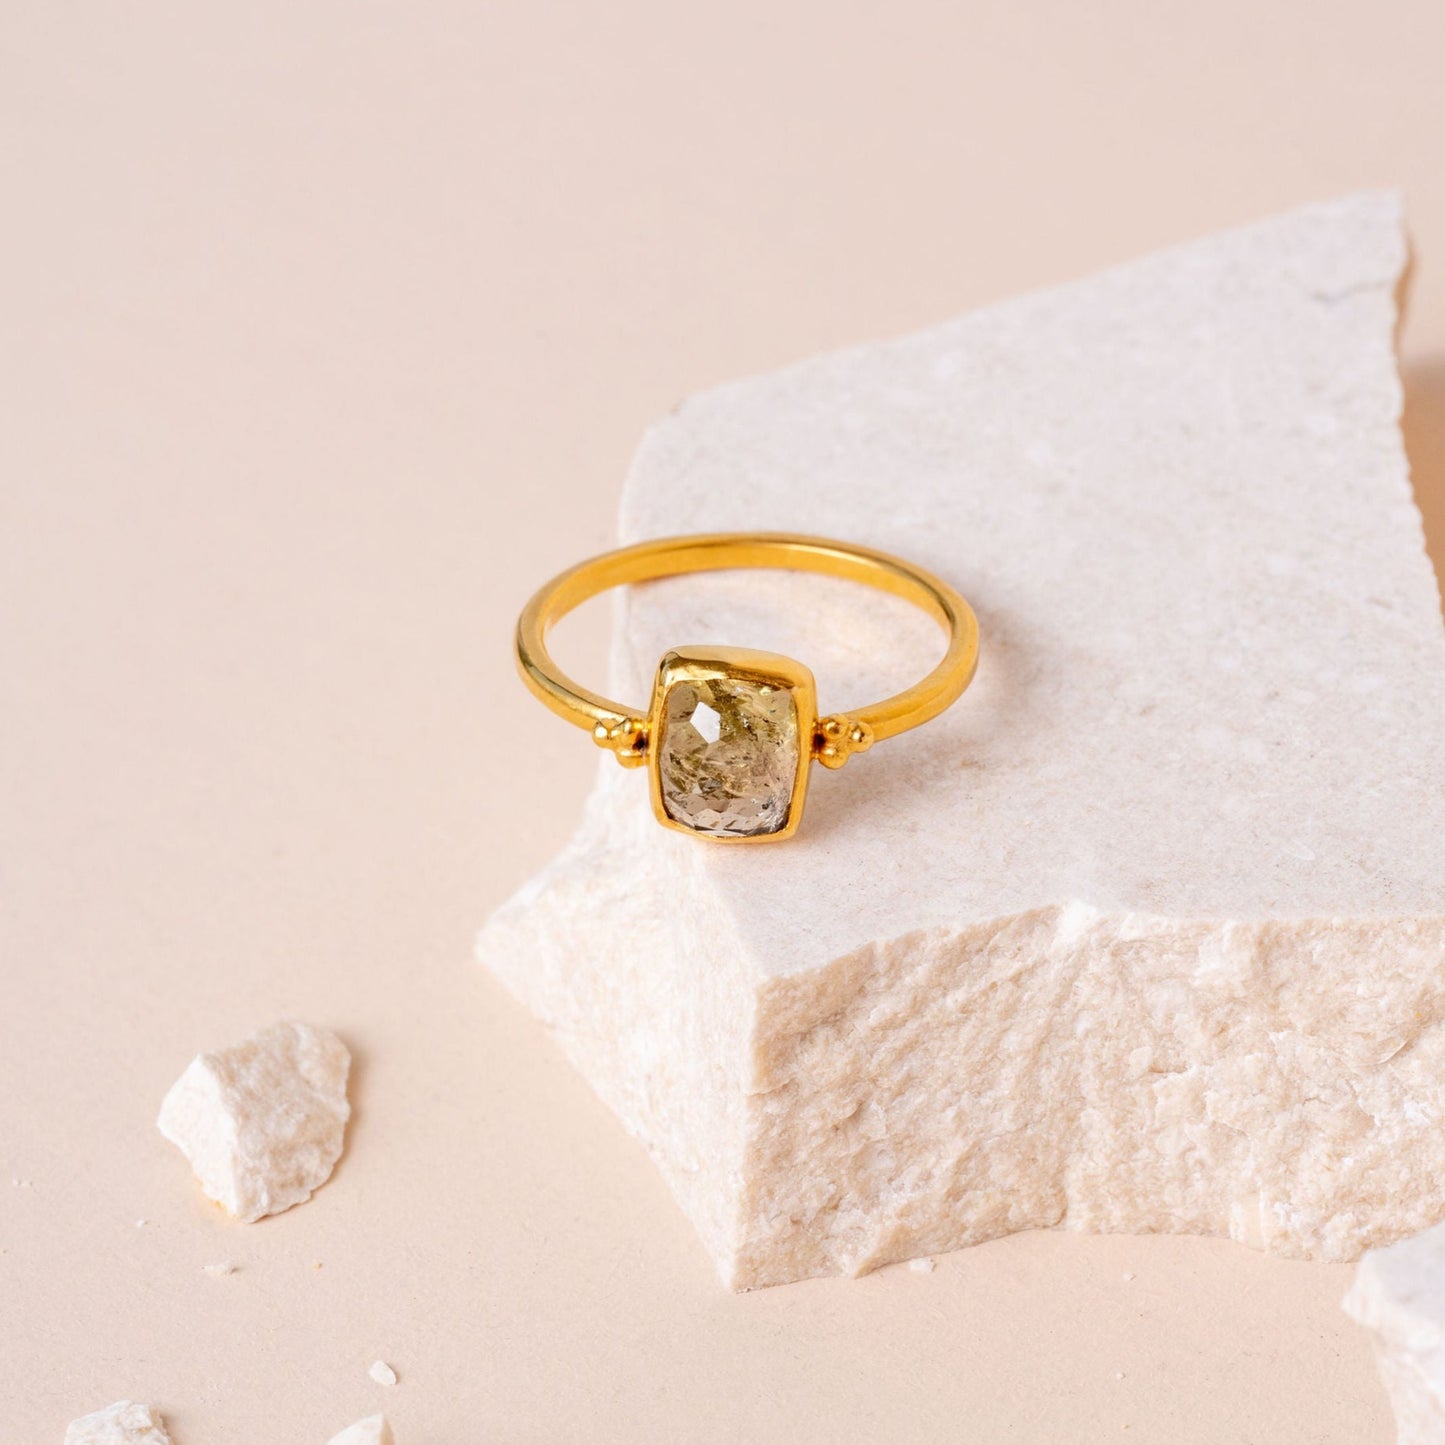 A stunning handcrafted gold ring, highlighted by deliacte granulation work, encasing a captivating olive-hued hand-cut gemstone.